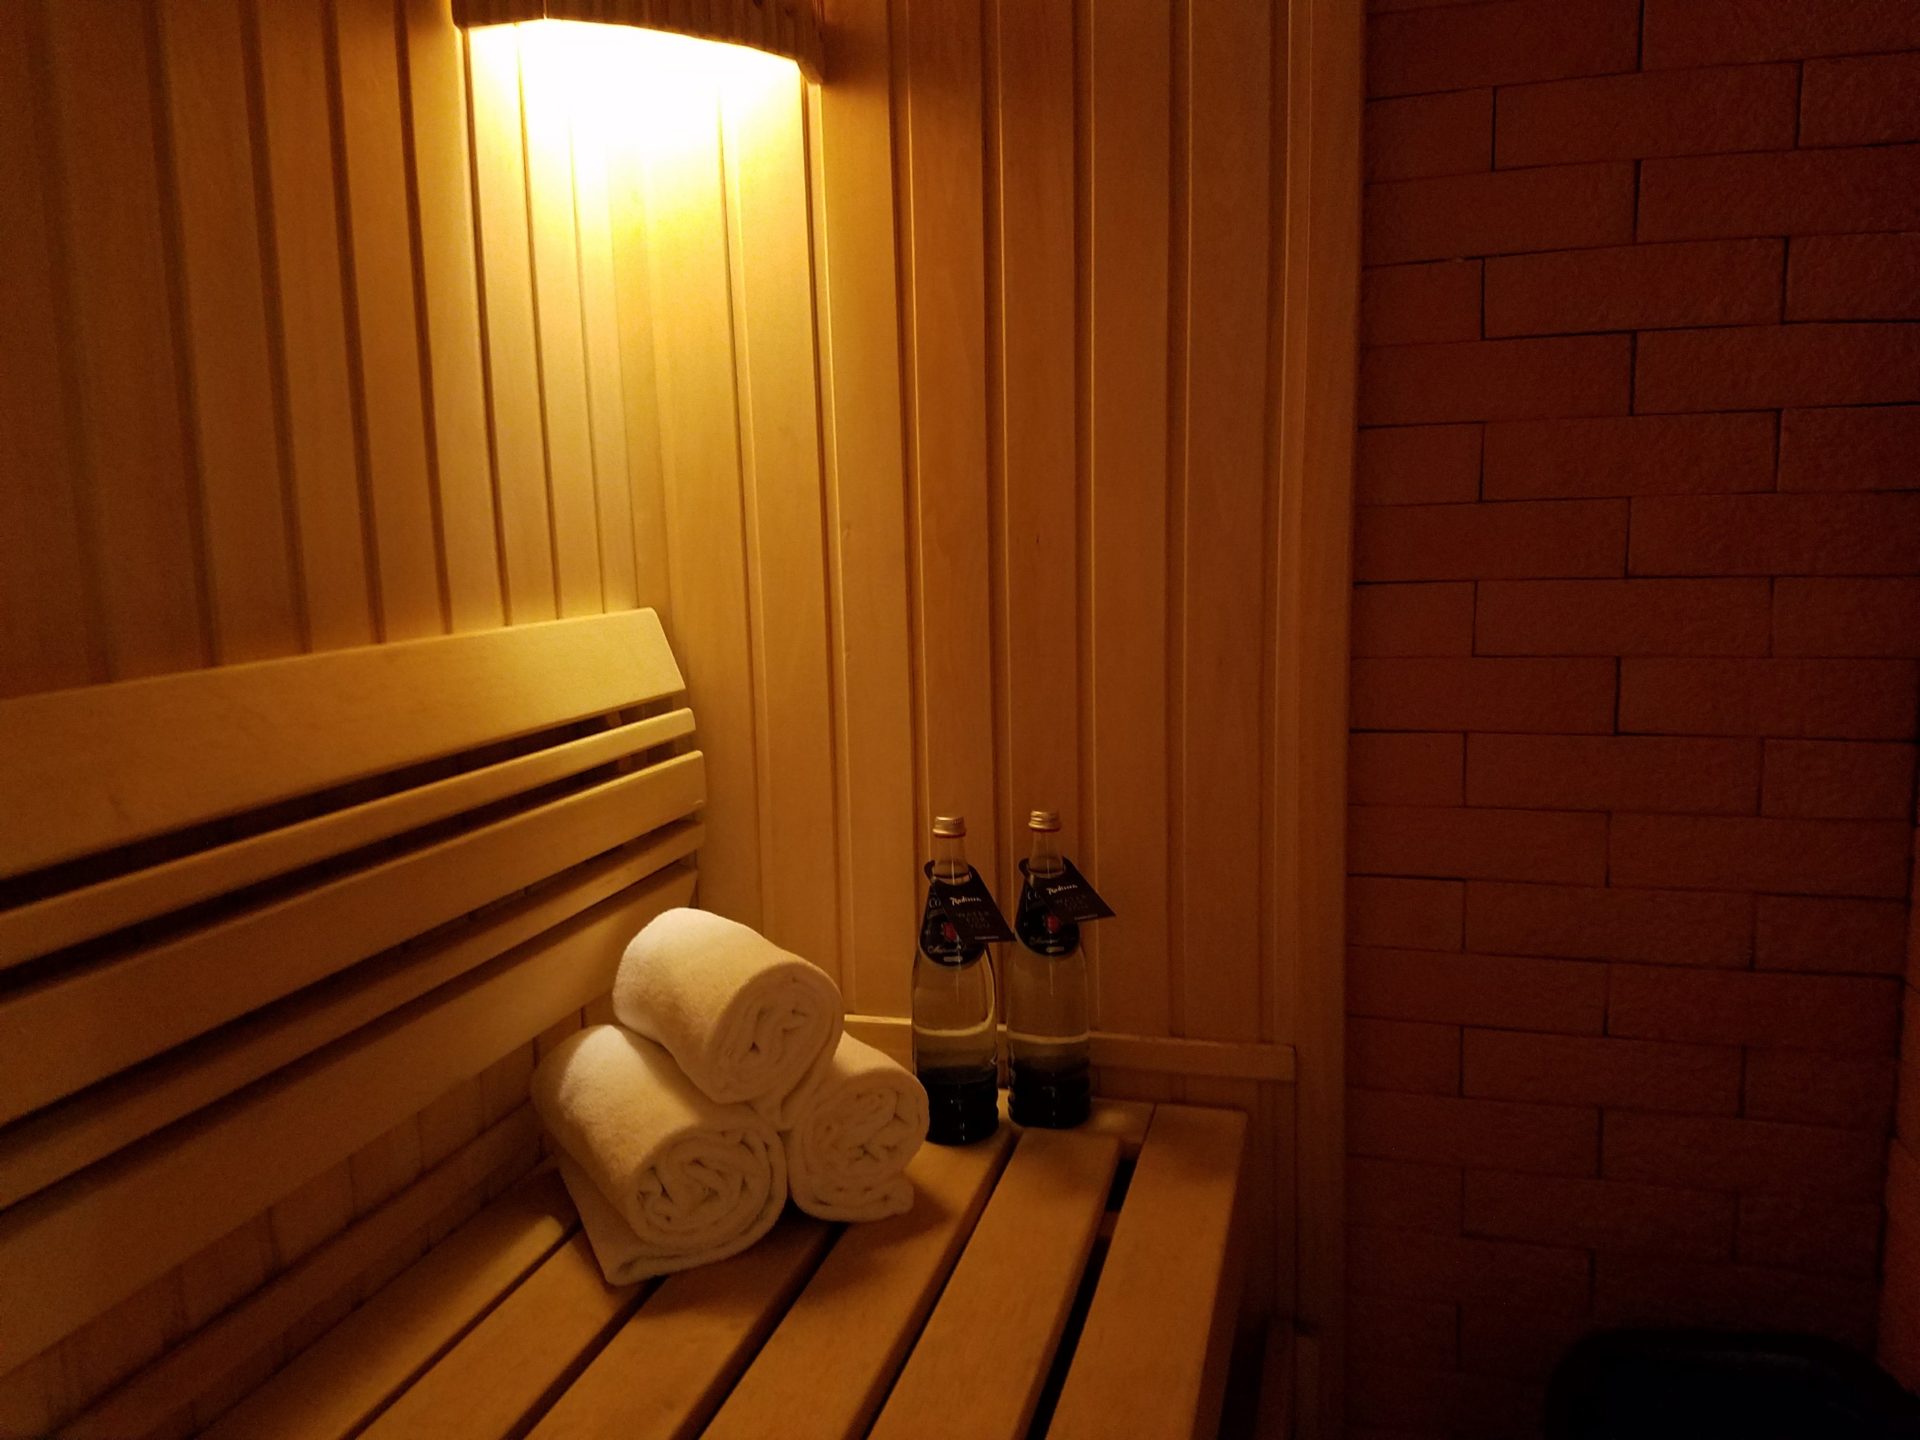 a wooden bench with towels and bottles on it